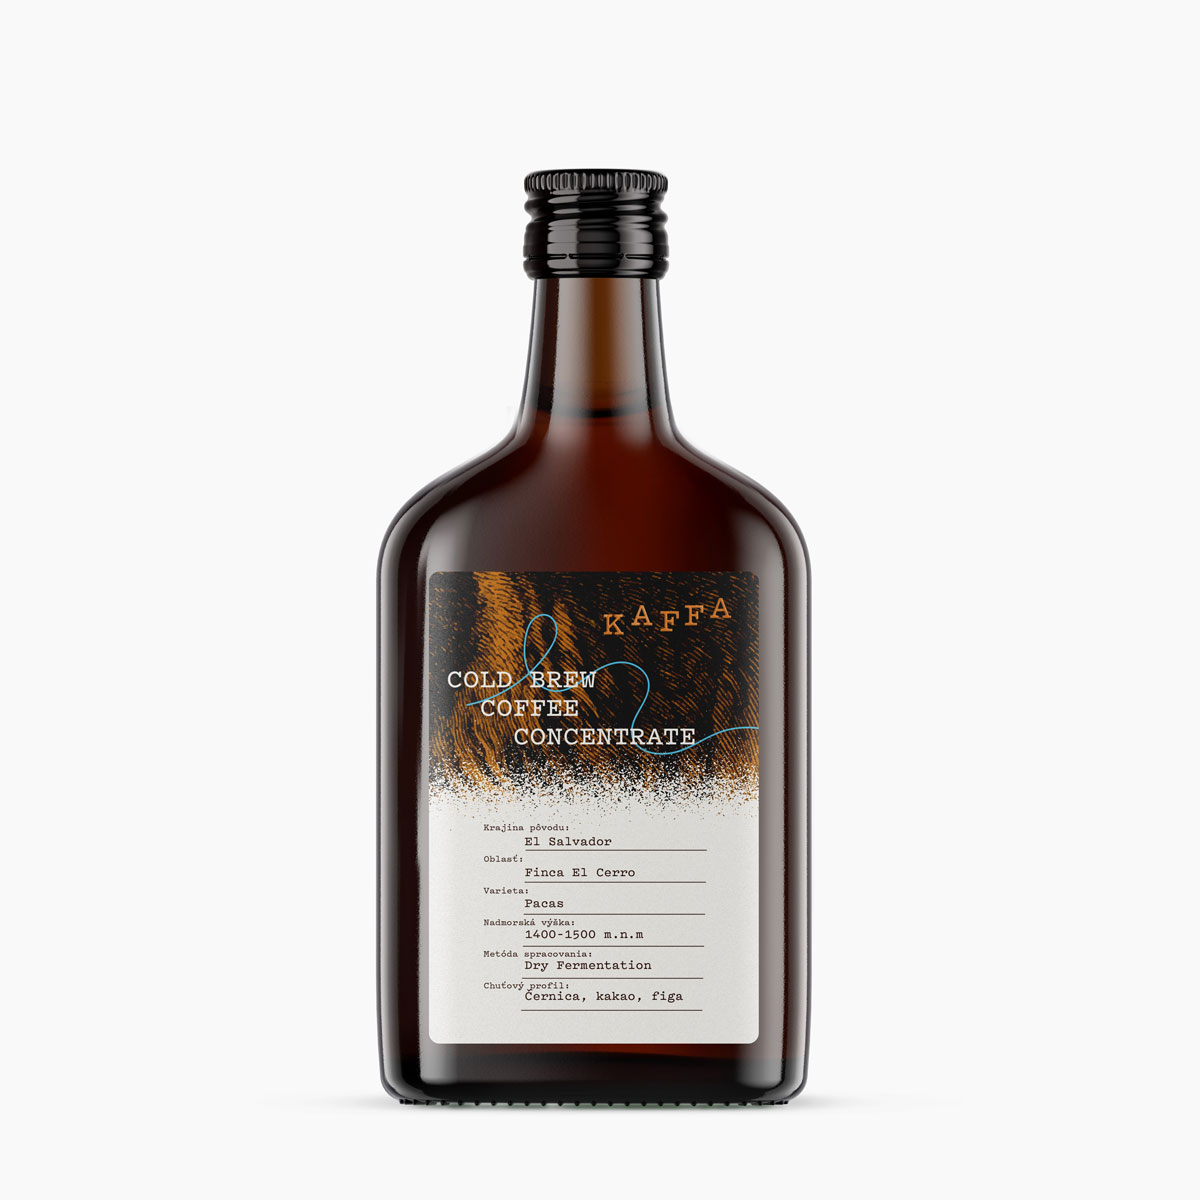 COLD BREW COFFEE CONCENTRATE 700ml